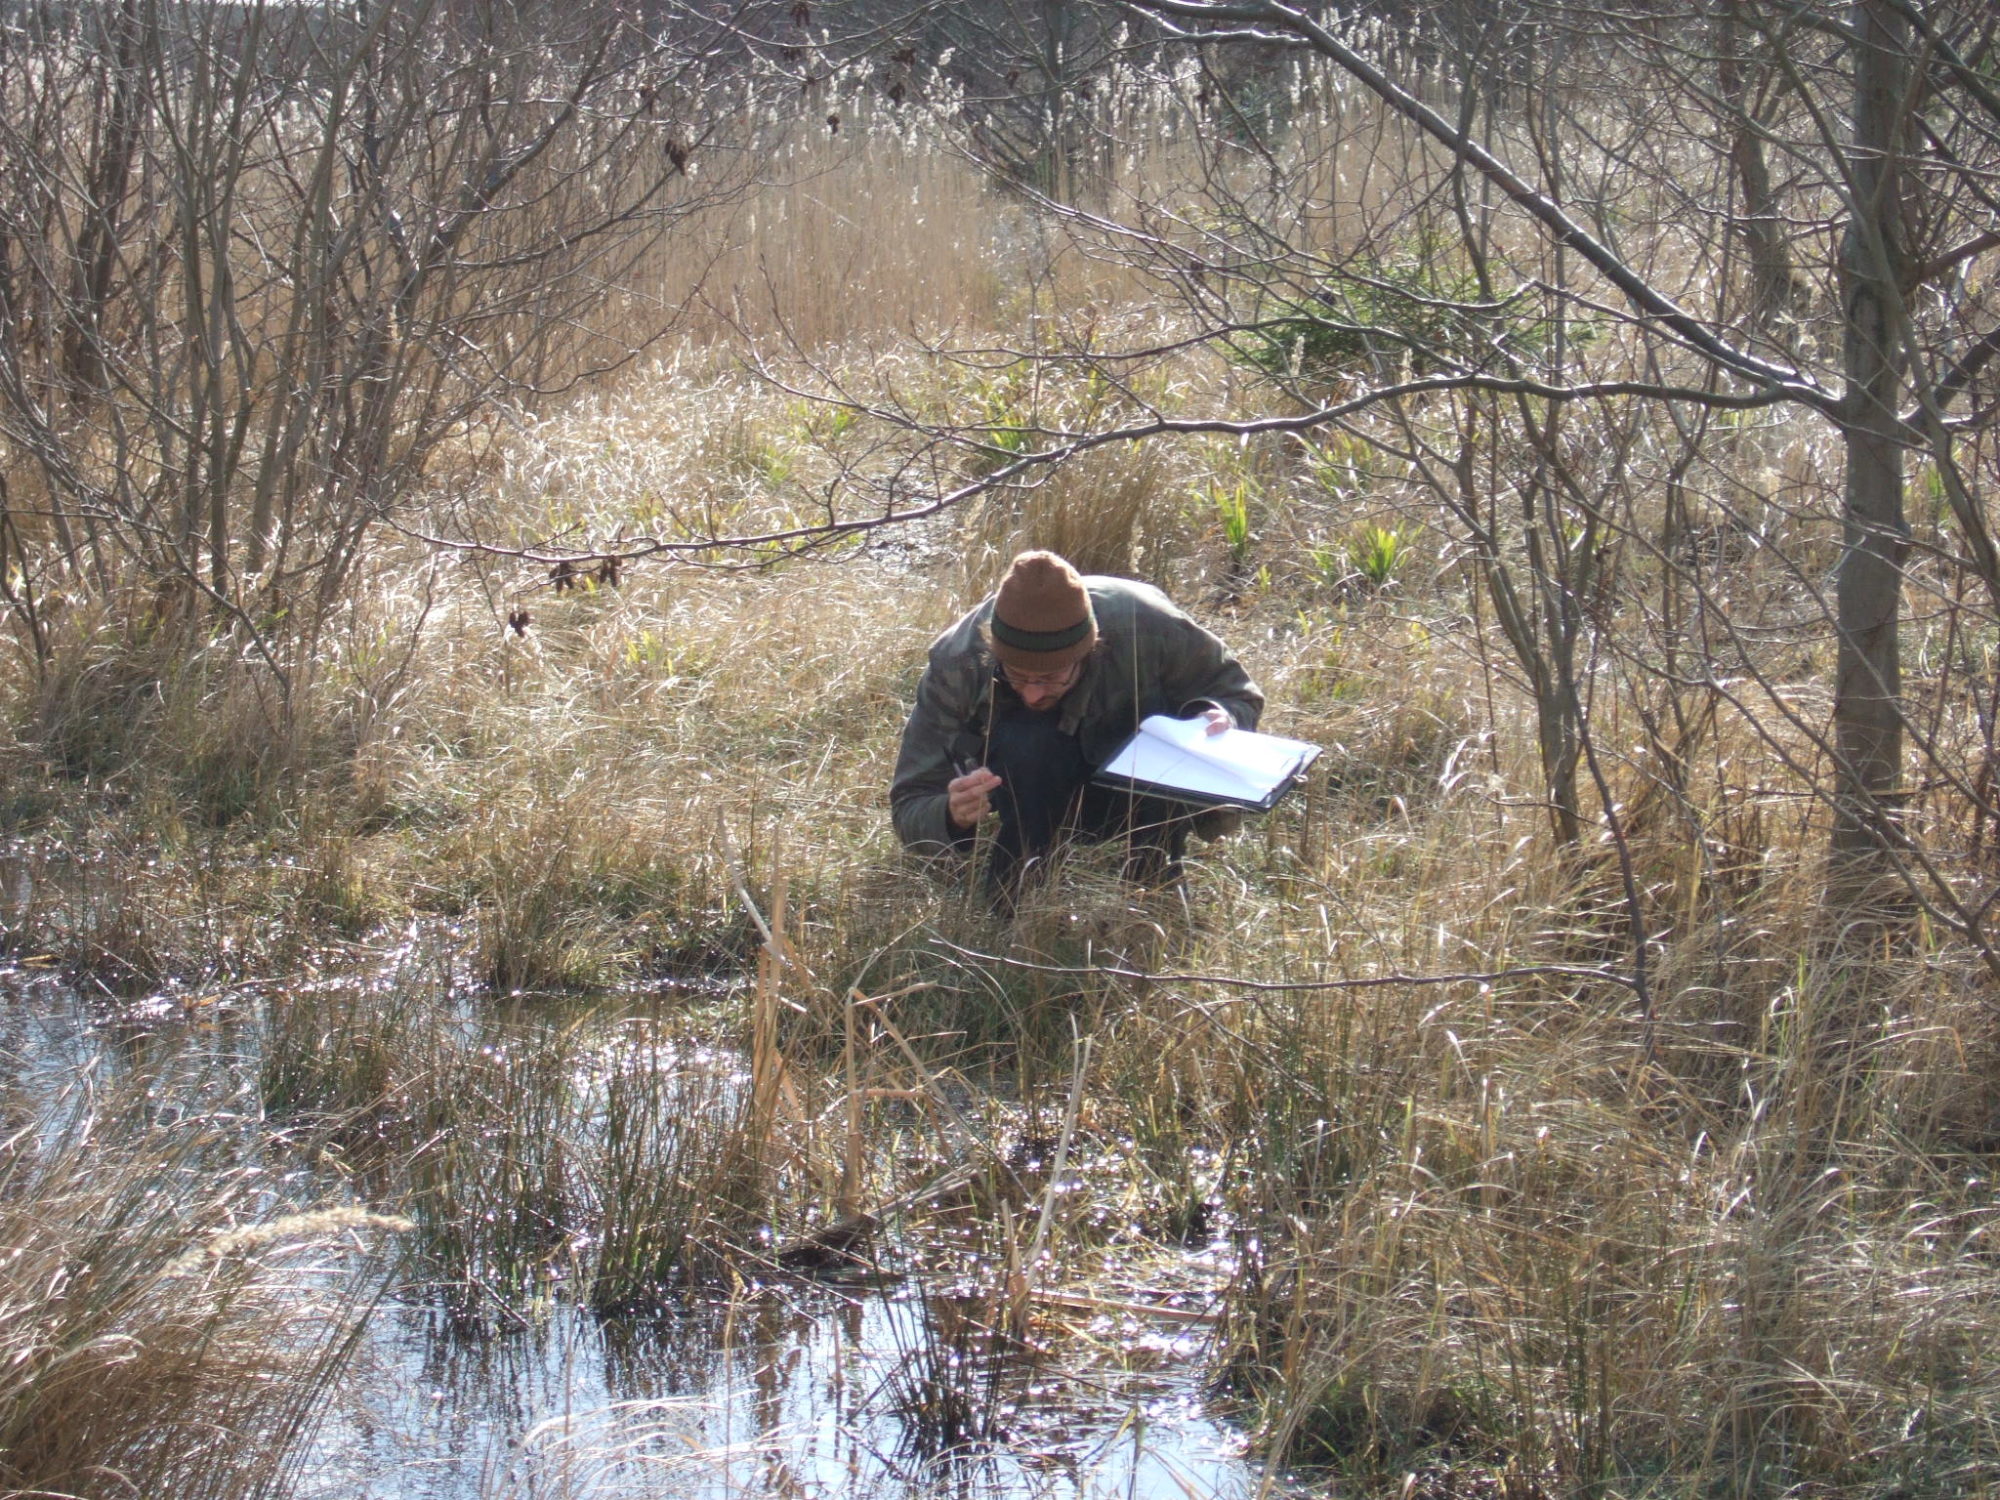 Dominic Woodfield hunched over the edge of a pond examining a plant with an A4 clipboard in his hand